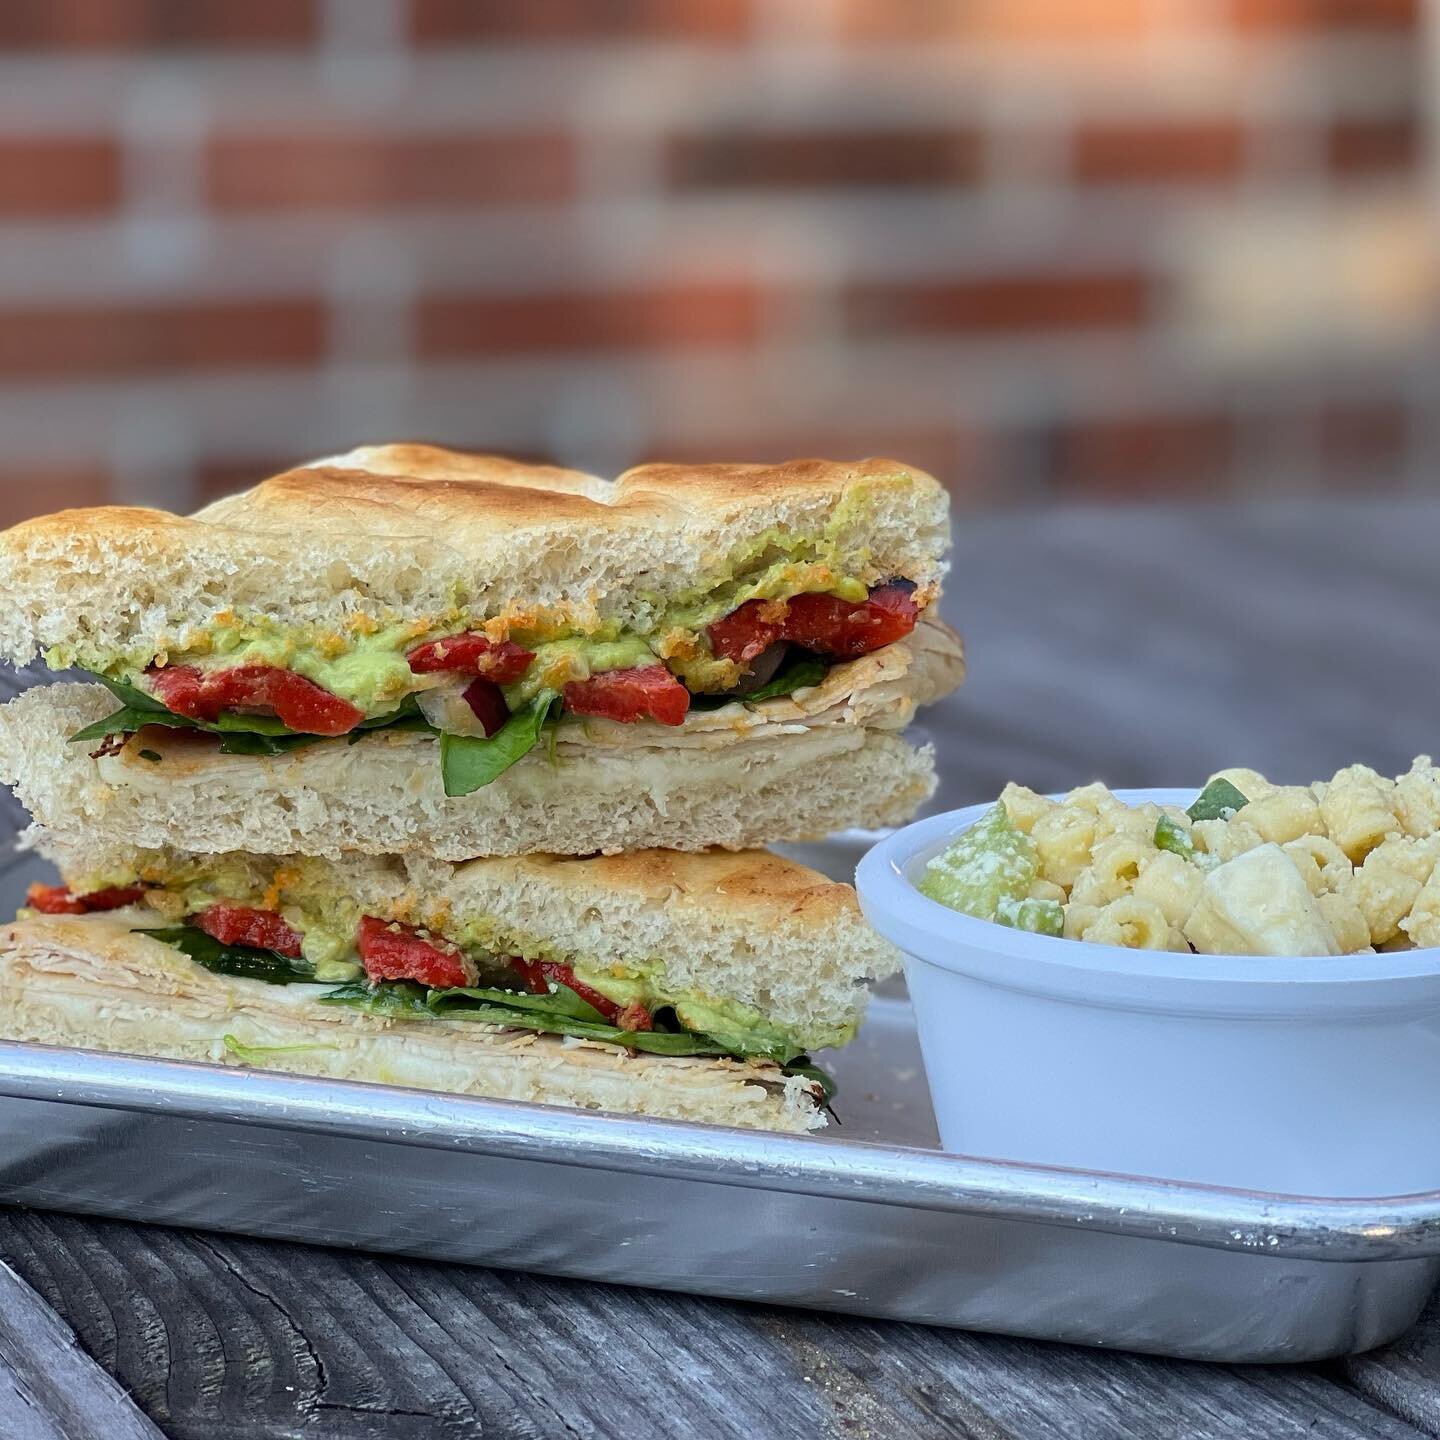 Feeling nostalgic this weekend. Bringing back the @tuttogelatocafe  Toscano Sandwich. 

Sliced turkey breast, provolone cheese, roasted red peppers, sliced red onion, spinach topped with avocado spread served on @risingcreekbakery sour dough bread. 
